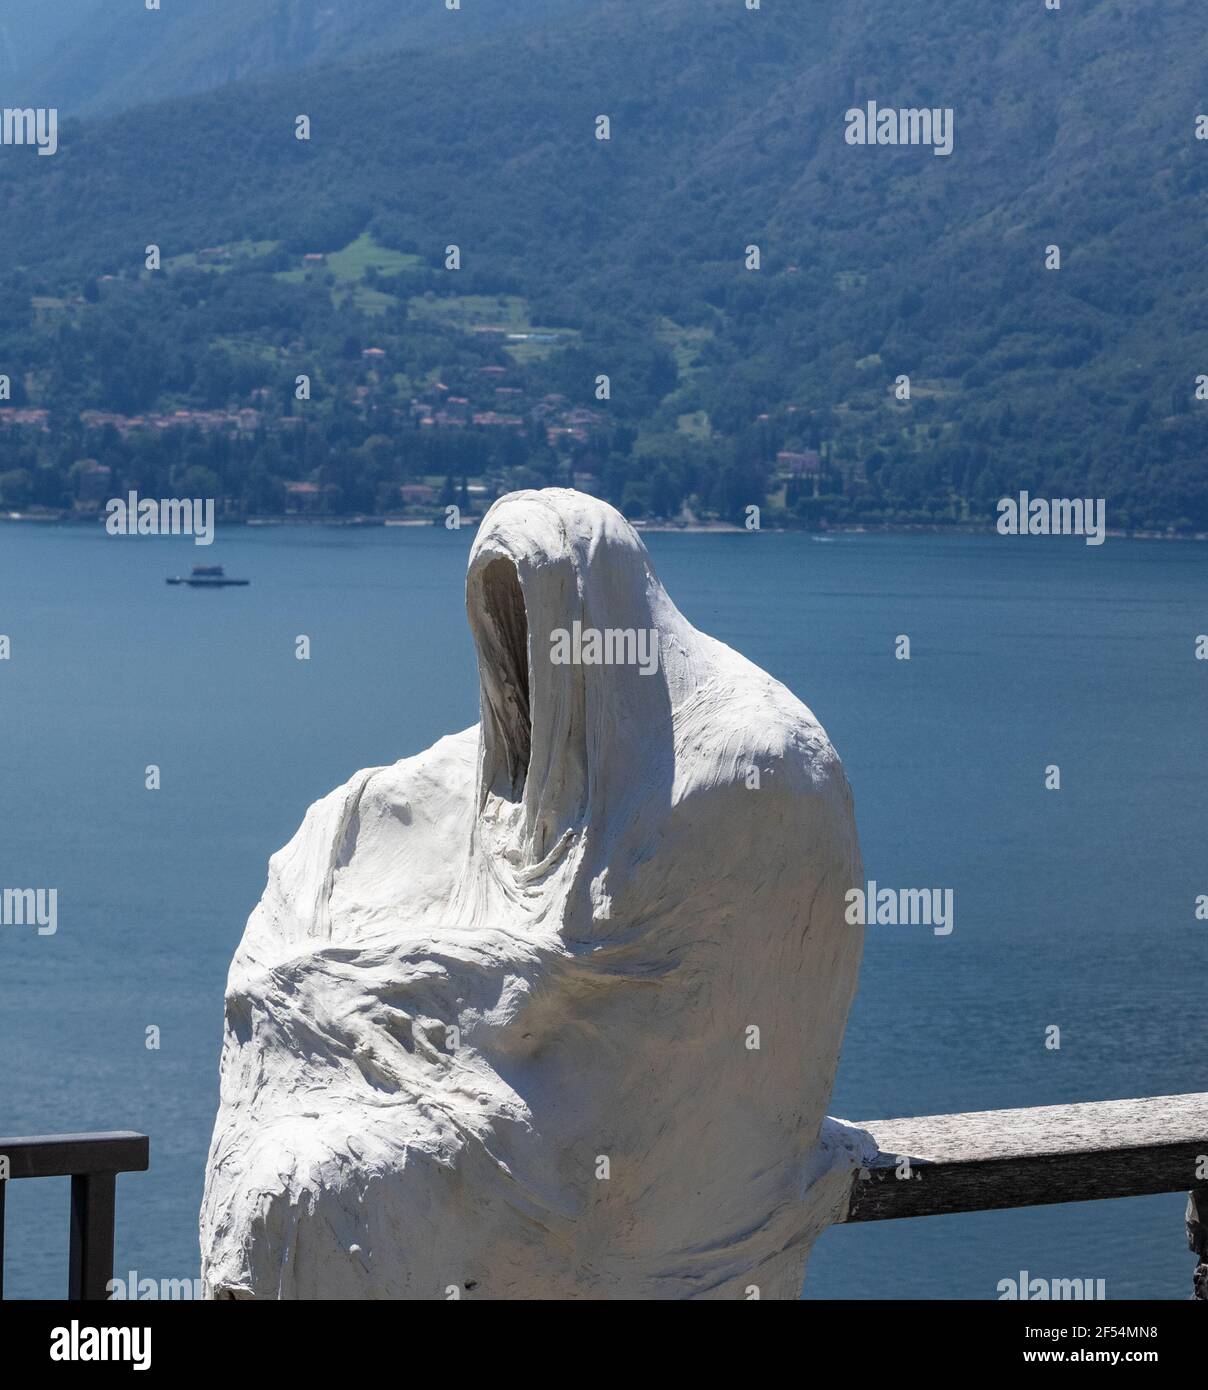 terrace with ghost guest of Vezio castle.Varenna, Como lake, lombardy, Italy Stock Photo